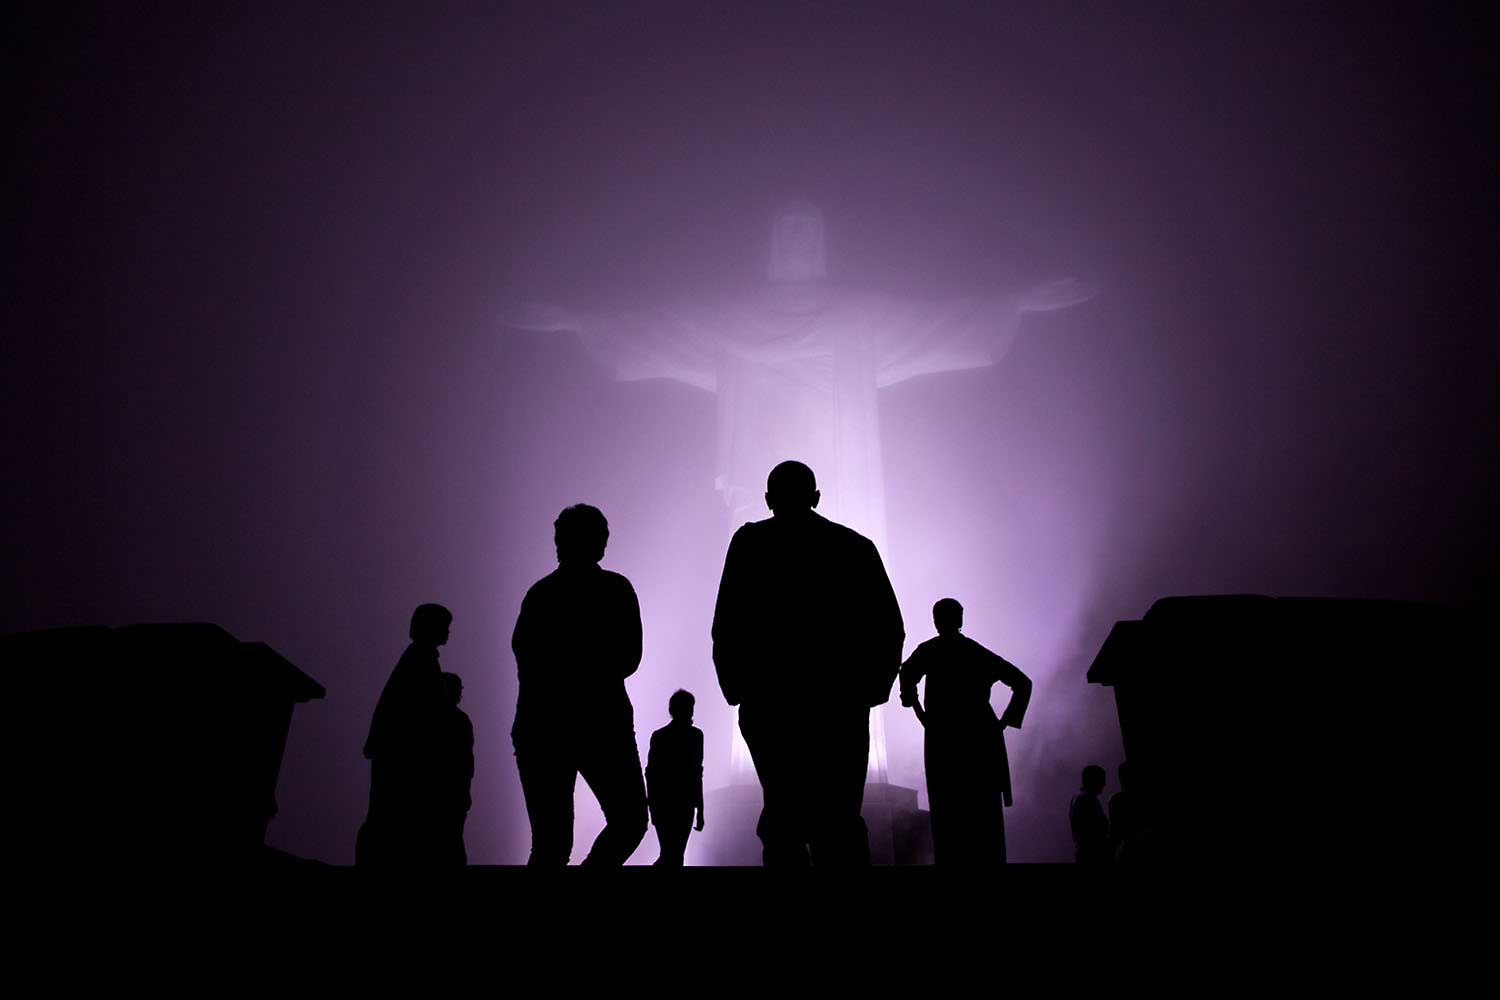 "The Obama family was scheduled to tour the Christ the Redeemer statue in Rio de Janeiro, Brazil, before dinner one night March 20, 2011. But when heavy fog rolled in, they decided to cancel the visit. After dinner though, the fog had dissipated somewhat so they decided to make the drive up the mountain after all. It was quite clear when they arrived and then the fog started to roll back in. I managed to capture this silhouette as they viewed the statute one last time just before departure."